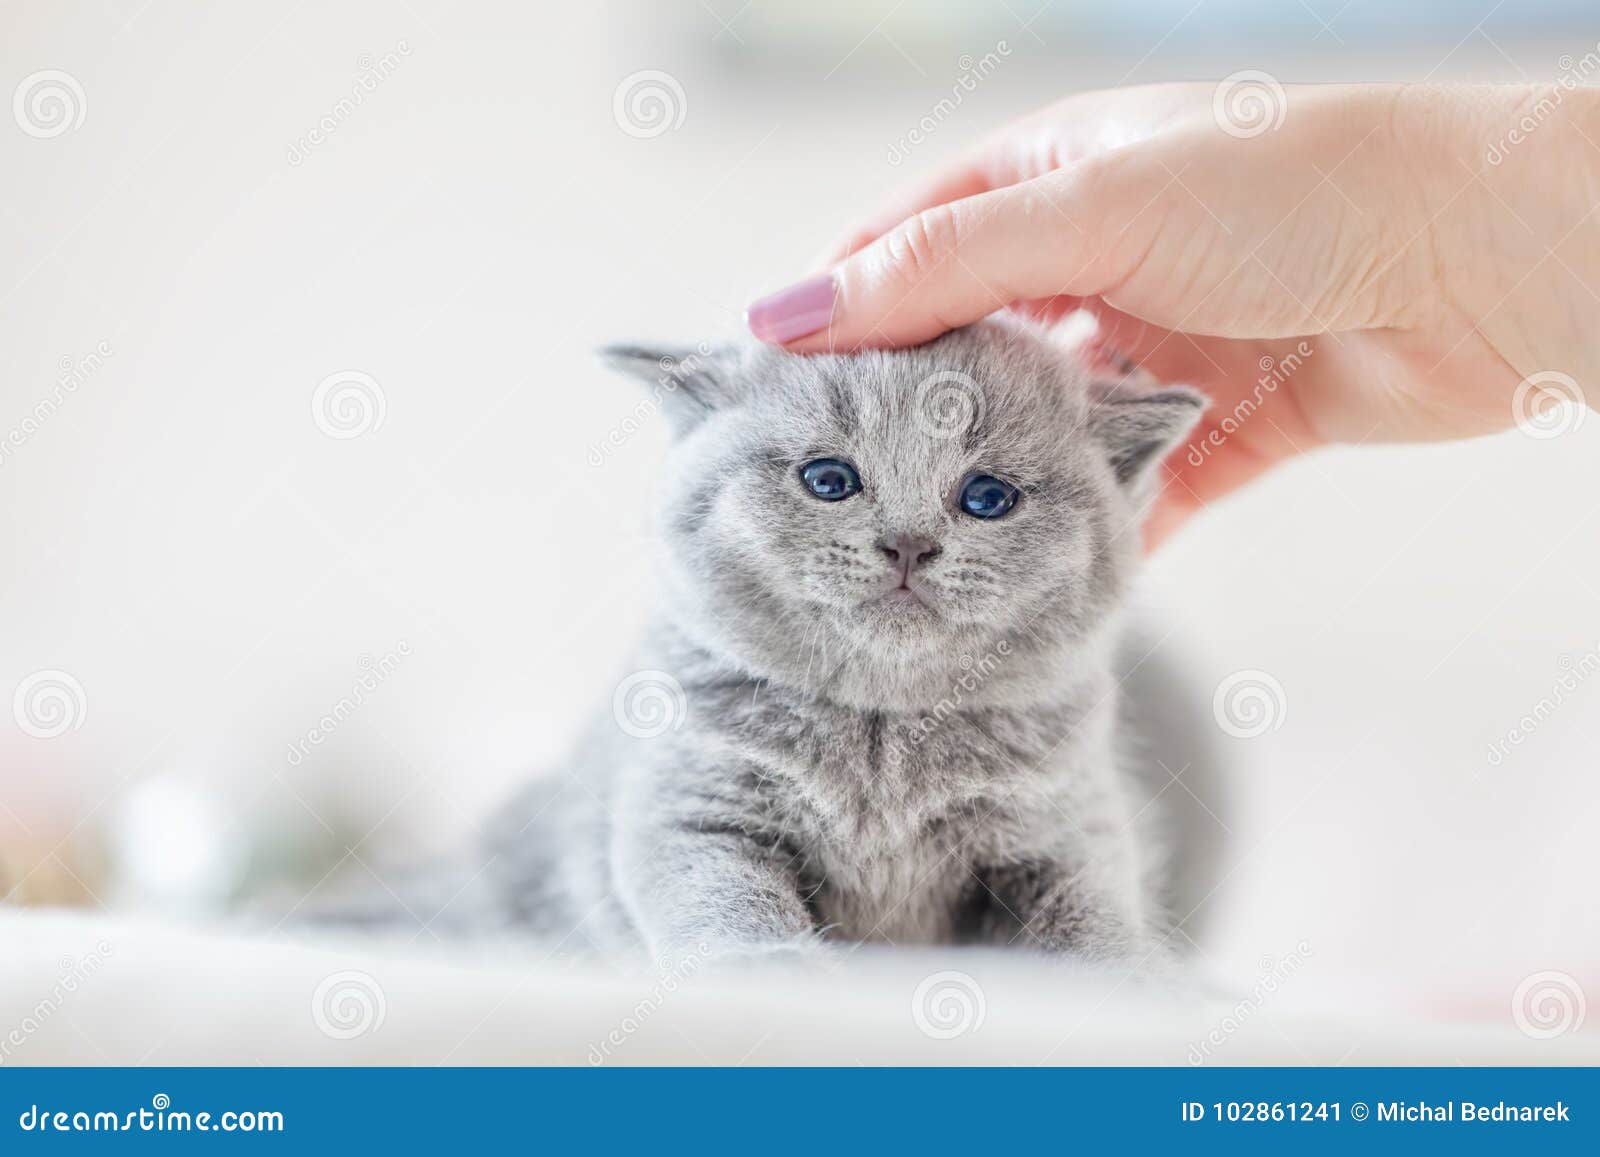 cute kitten loves being stroked by woman`s hand